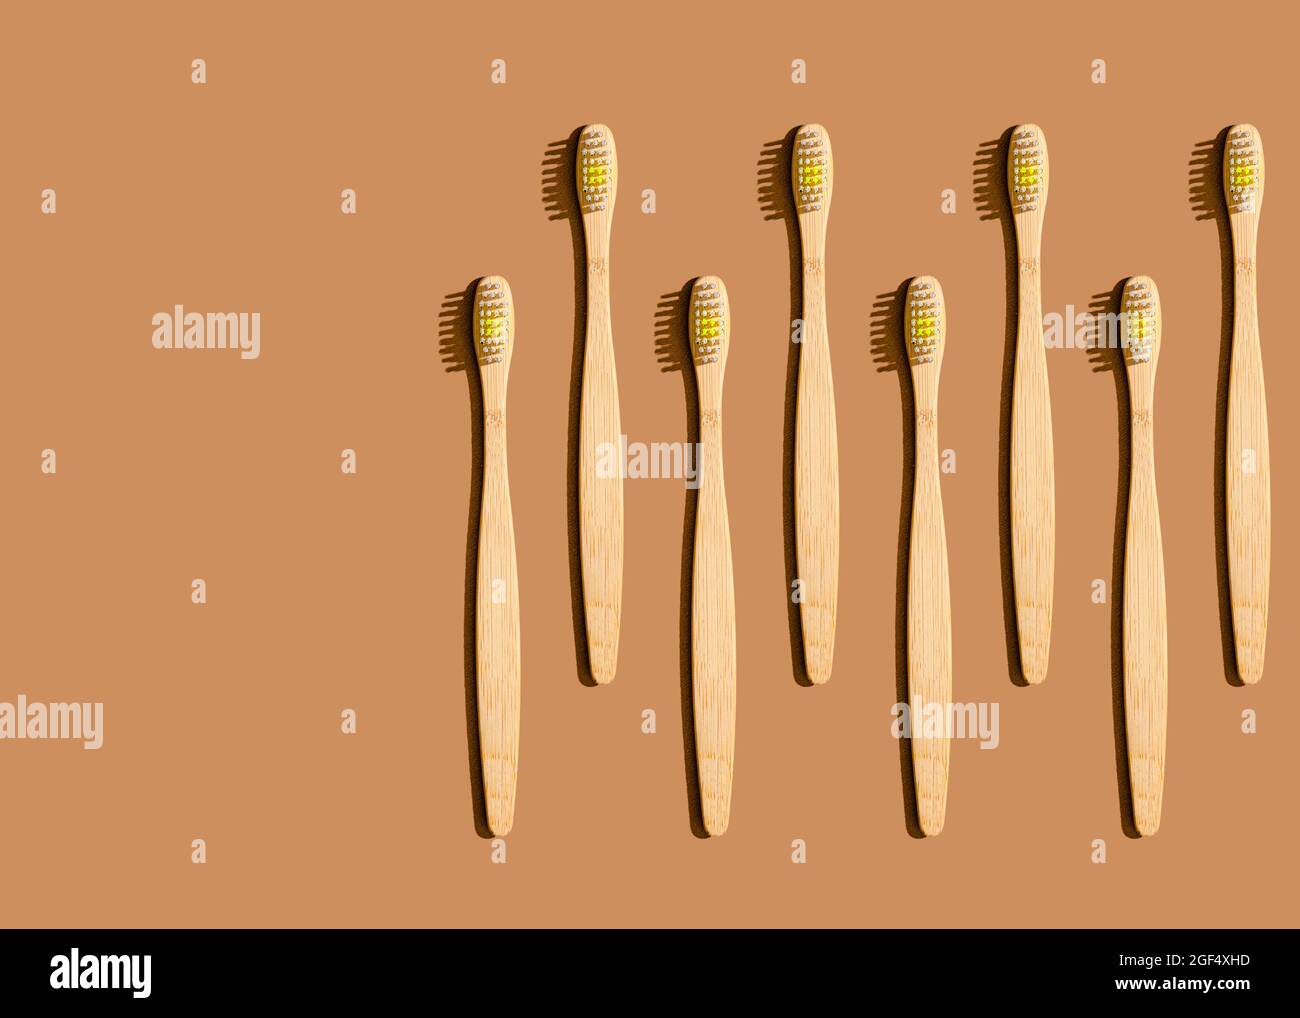 Pattern of wooden toothbrushes flat laid against brown background Stock Photo